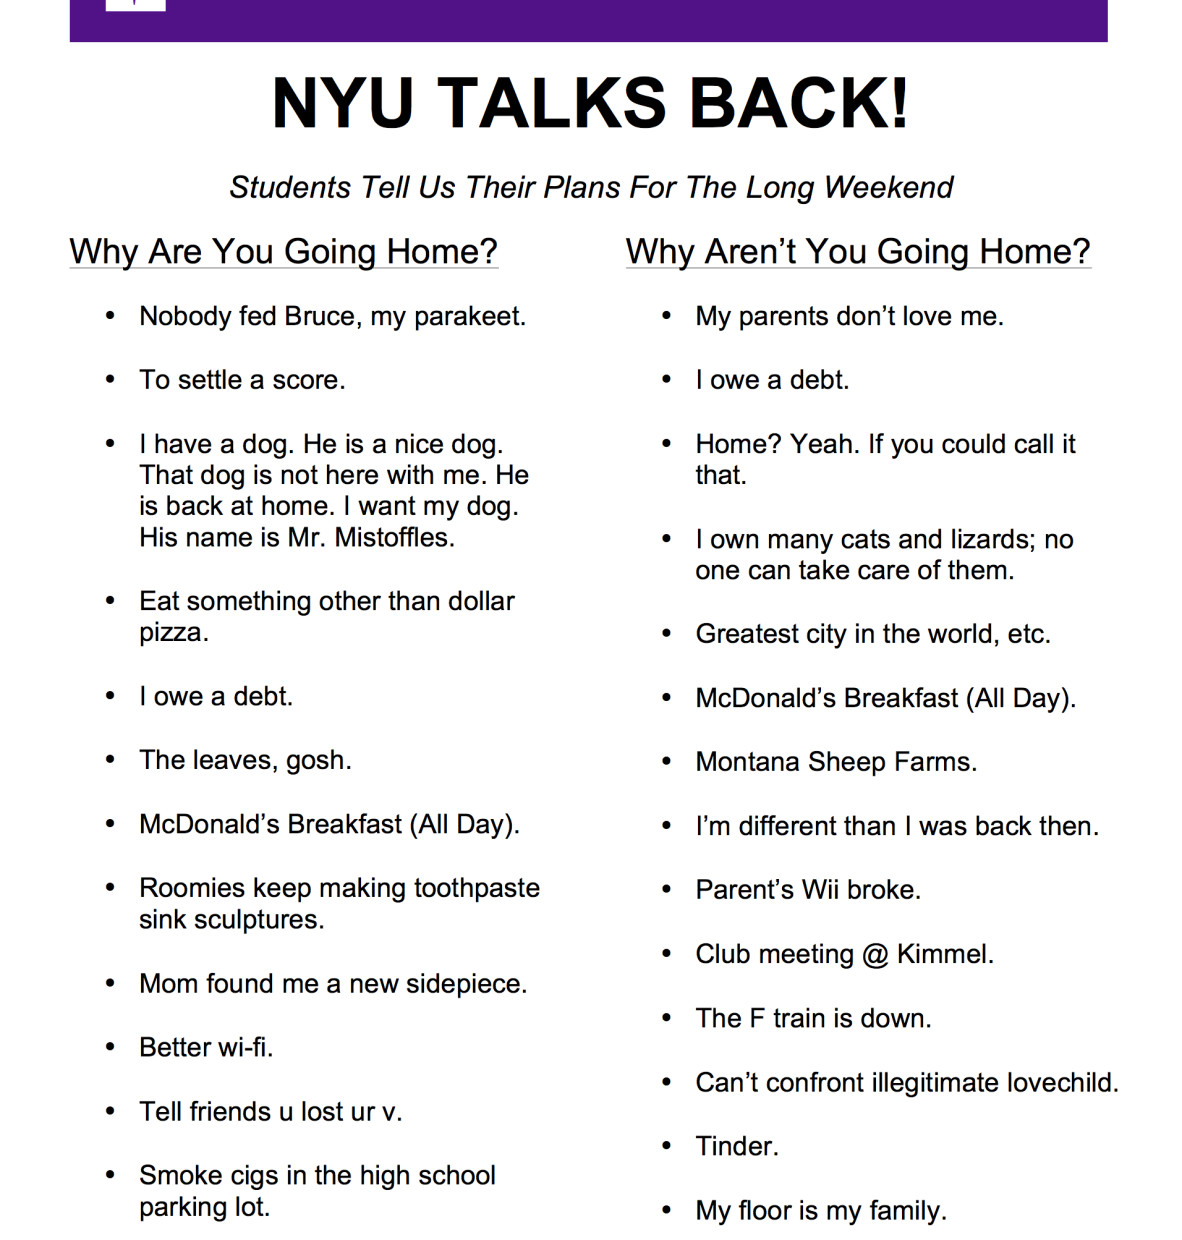 NYU Talks Back! Students Share Why They’re Choosing To Go Home or Not This Fall Break